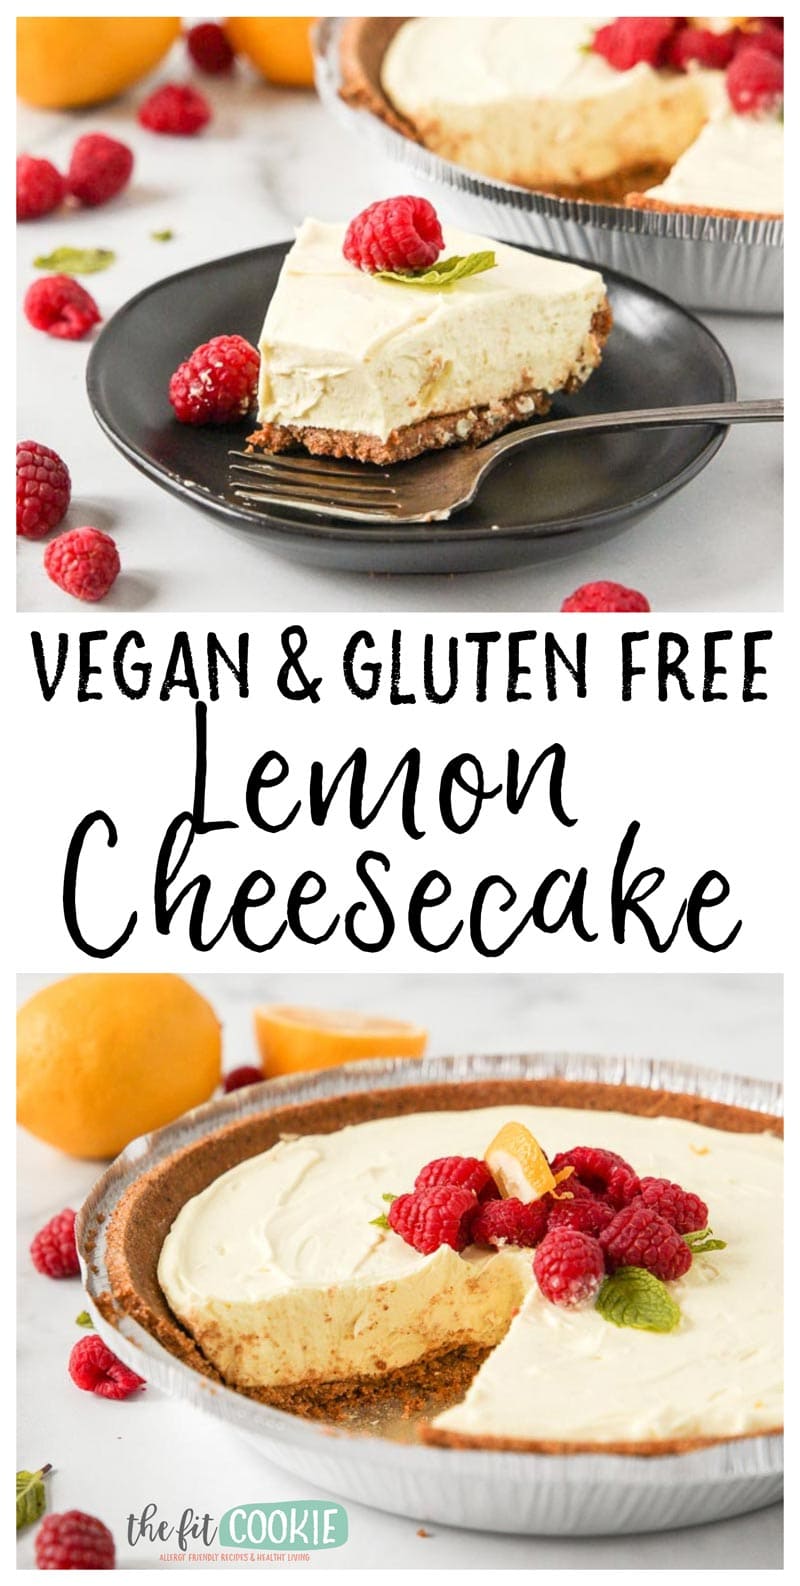 No Bake Dairy Free Lemon Cheesecake Gluten Free The Fit Cookie,Passion Flower Vine Leaf